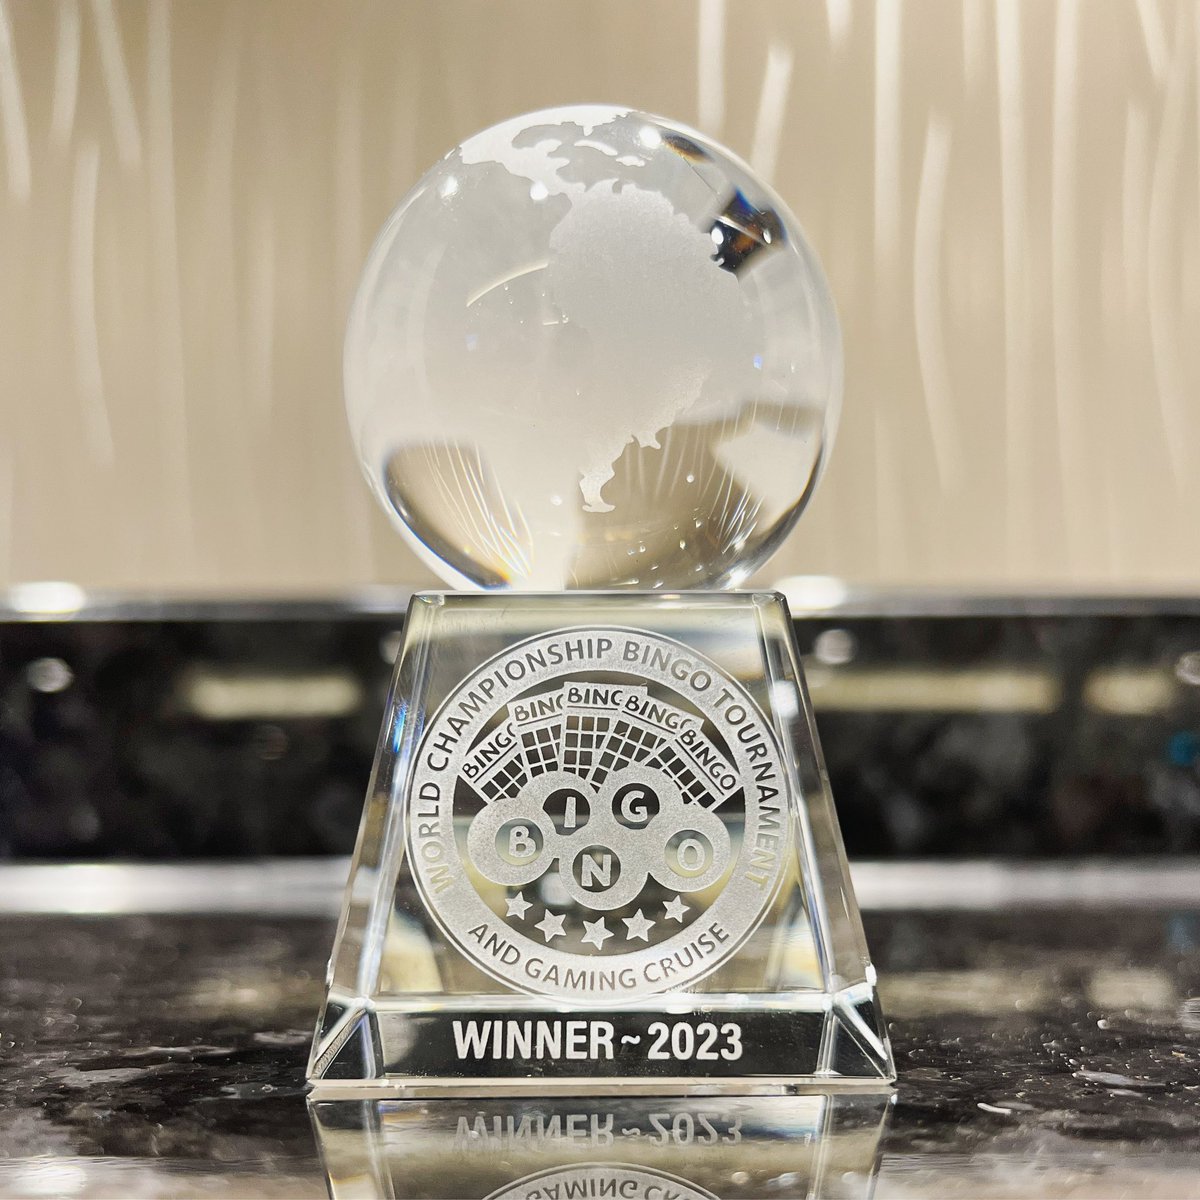 Who’s going to take home the 2023 World Championship Bingo Tournament and Gaming Cruise℠ trophy?

#BingoCruising #BingoCruise #BingoCruise2023 #Cruise #Bingo #Travel #BingoWinner